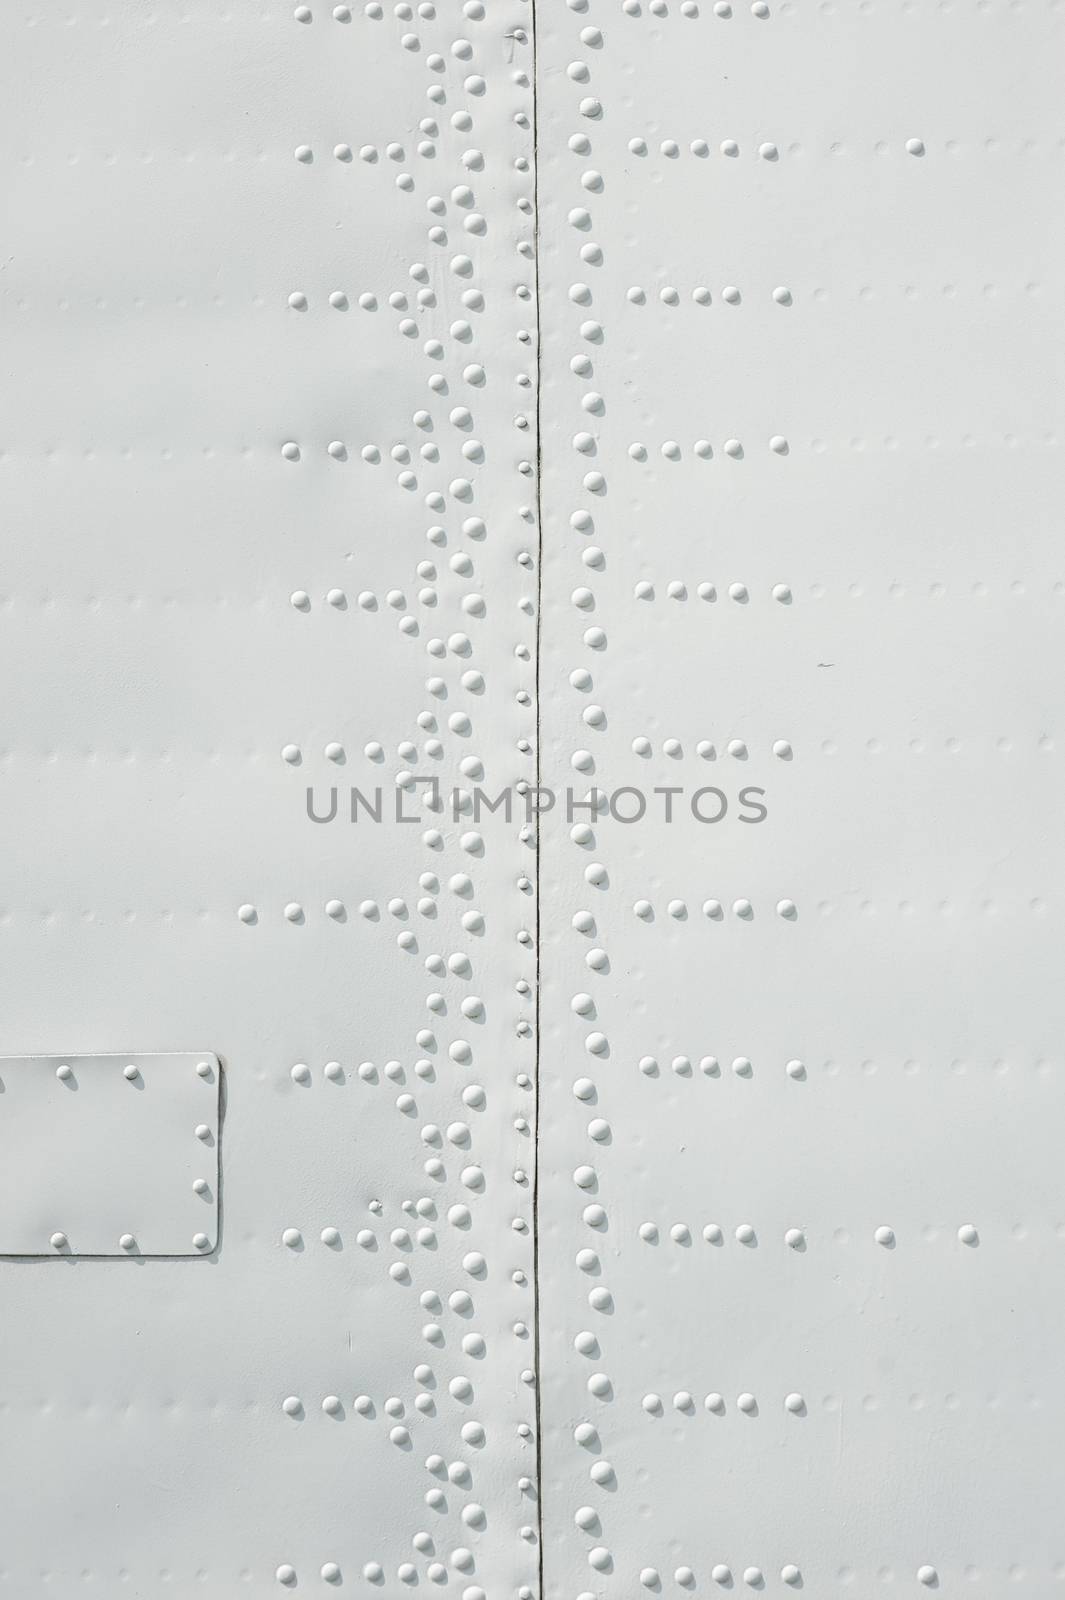 texture of the white metal plates with rivets.